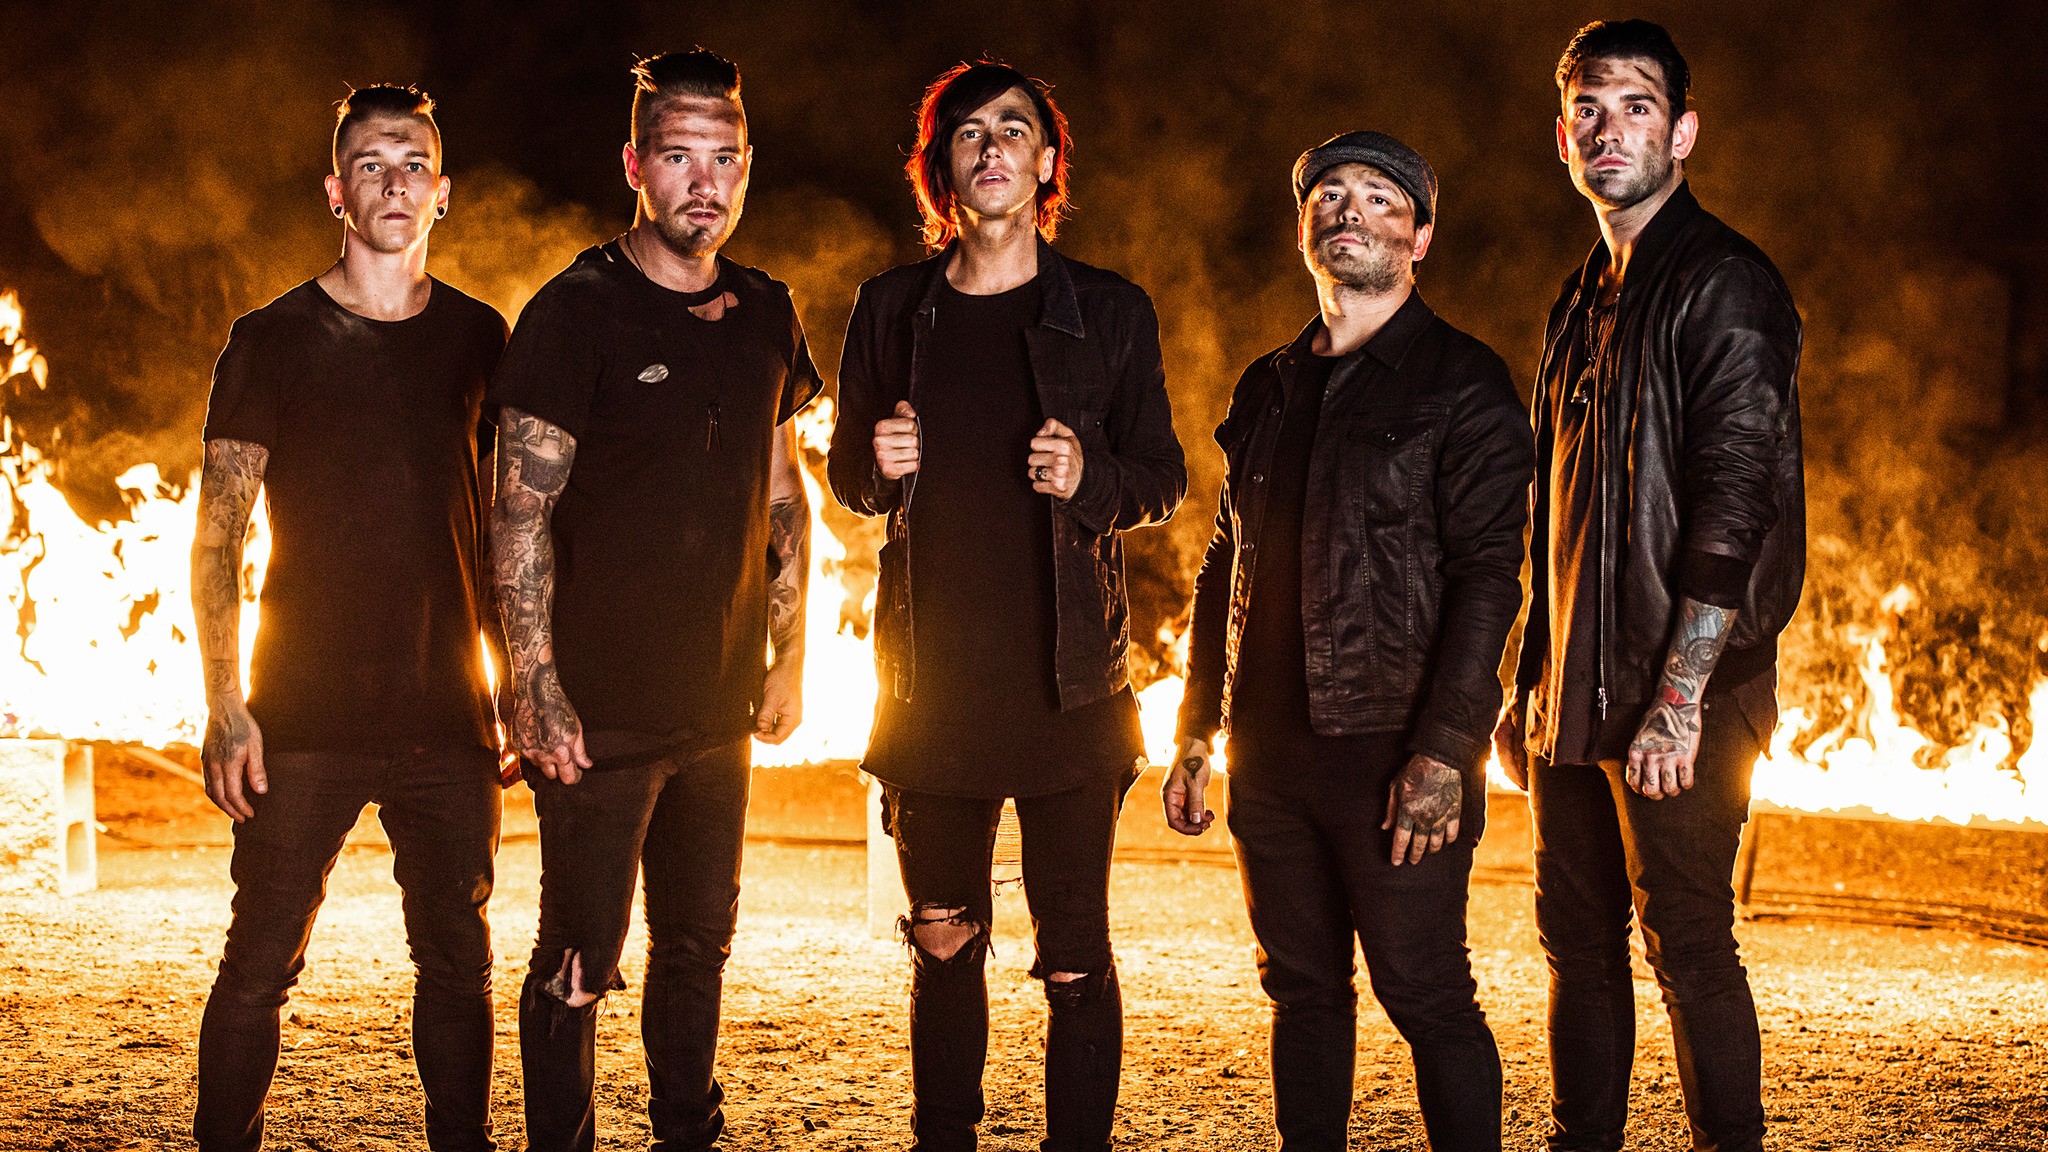 Sleeping With Sirens announce video for ‘Cheers’ ahead of UK tour